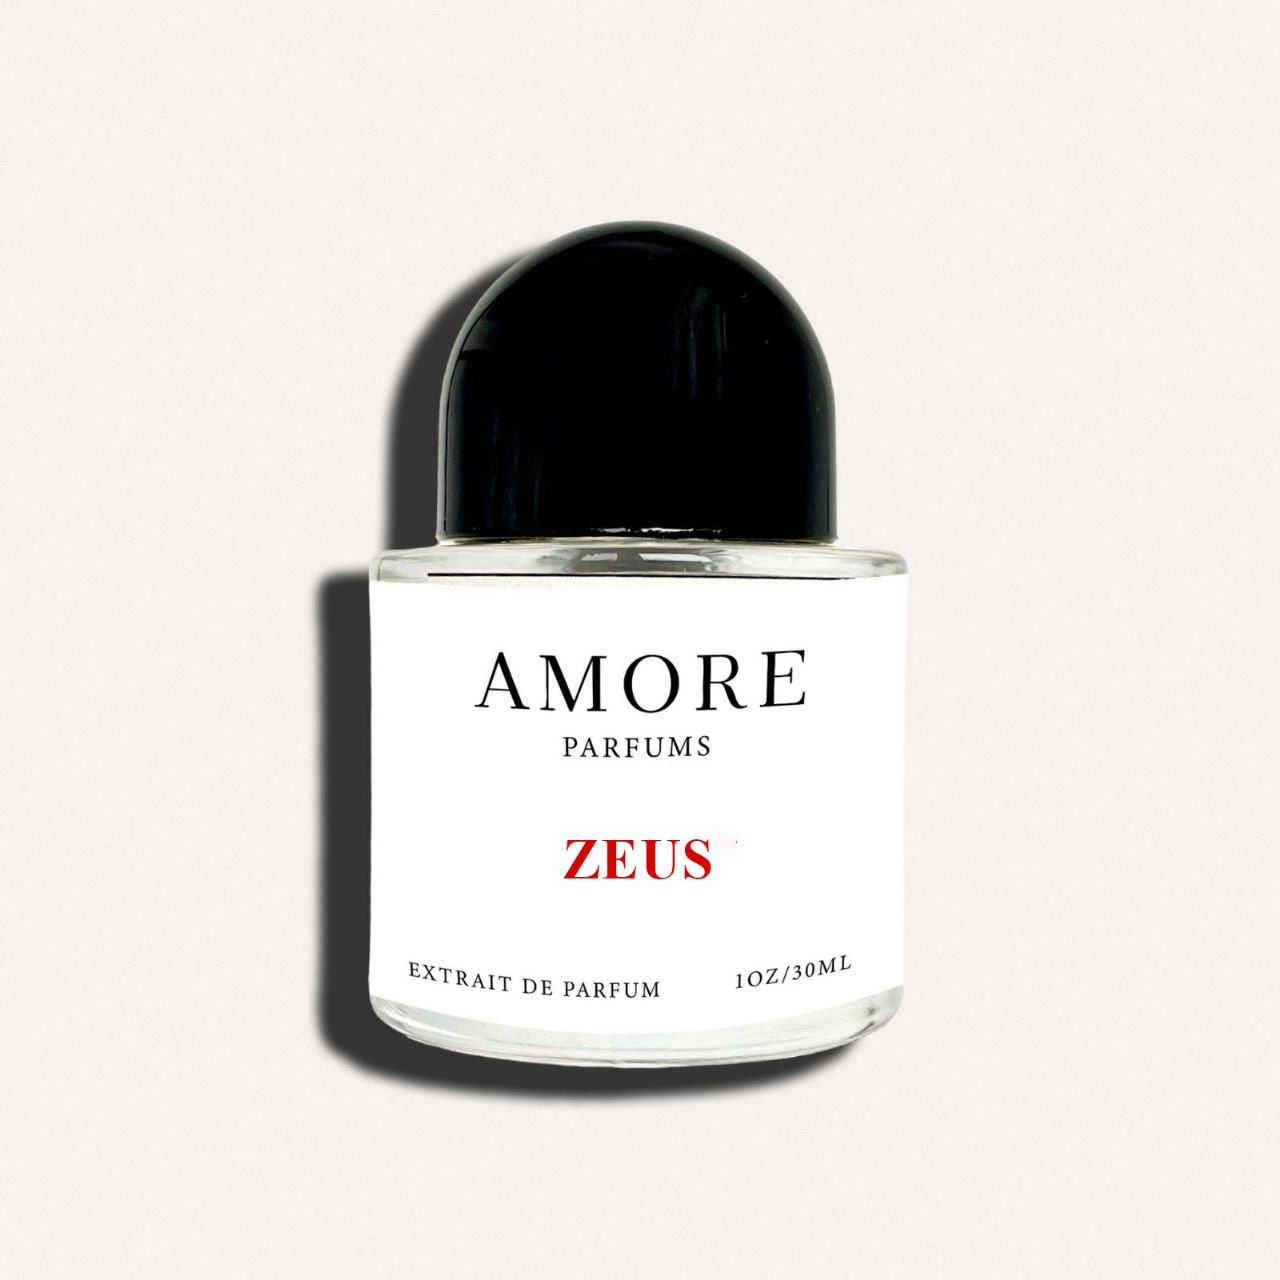 Our Impression of L'Immensite By - The Fragrance Square